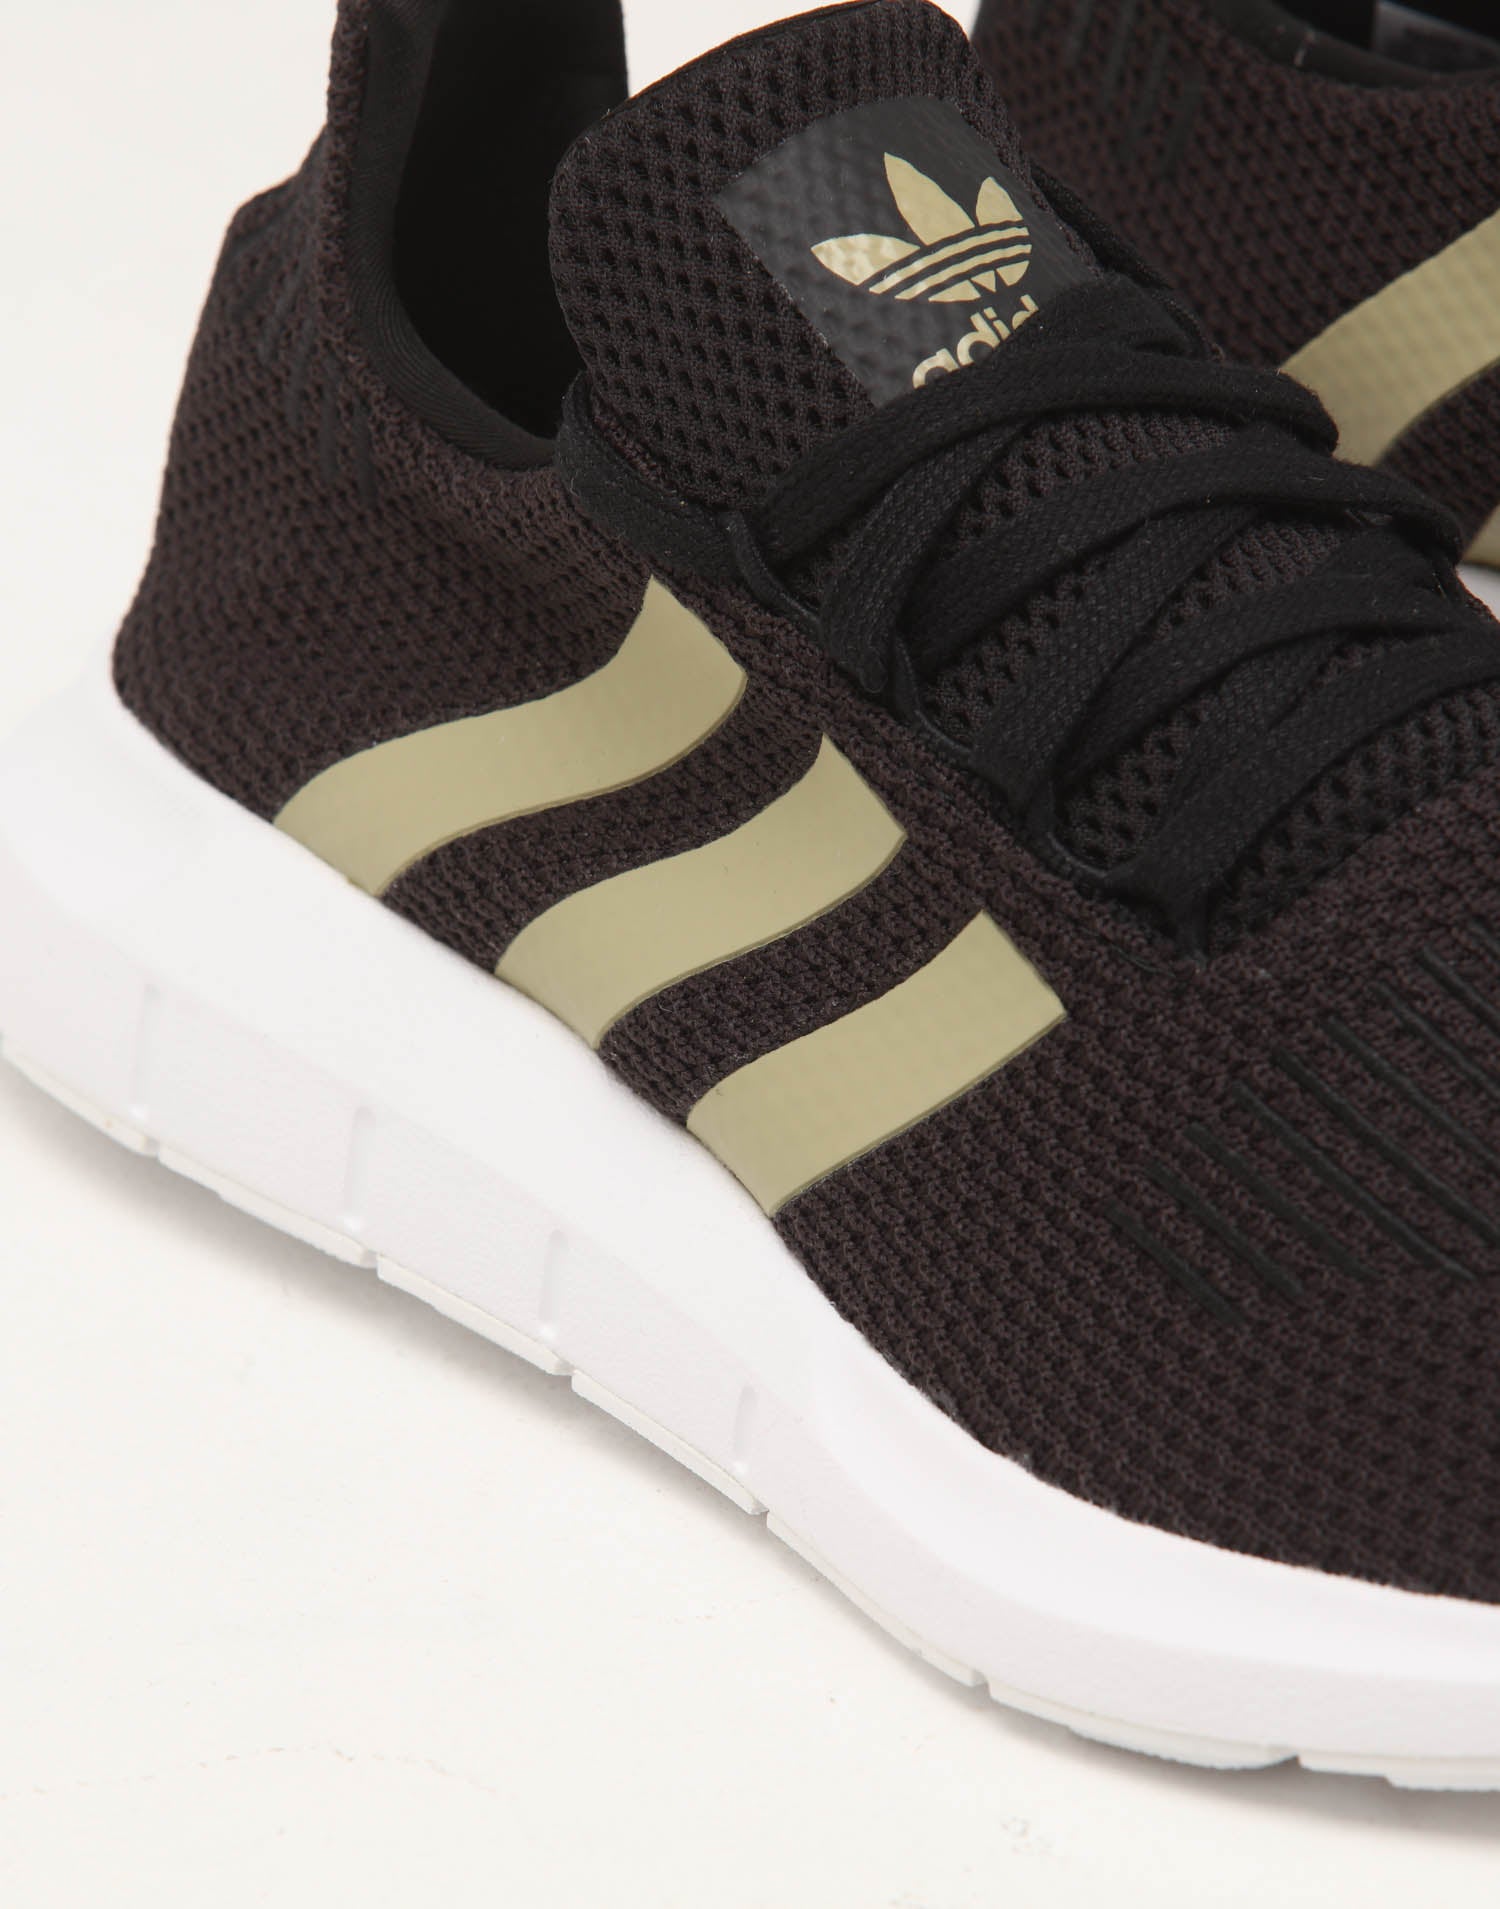 black and gold adidas swift